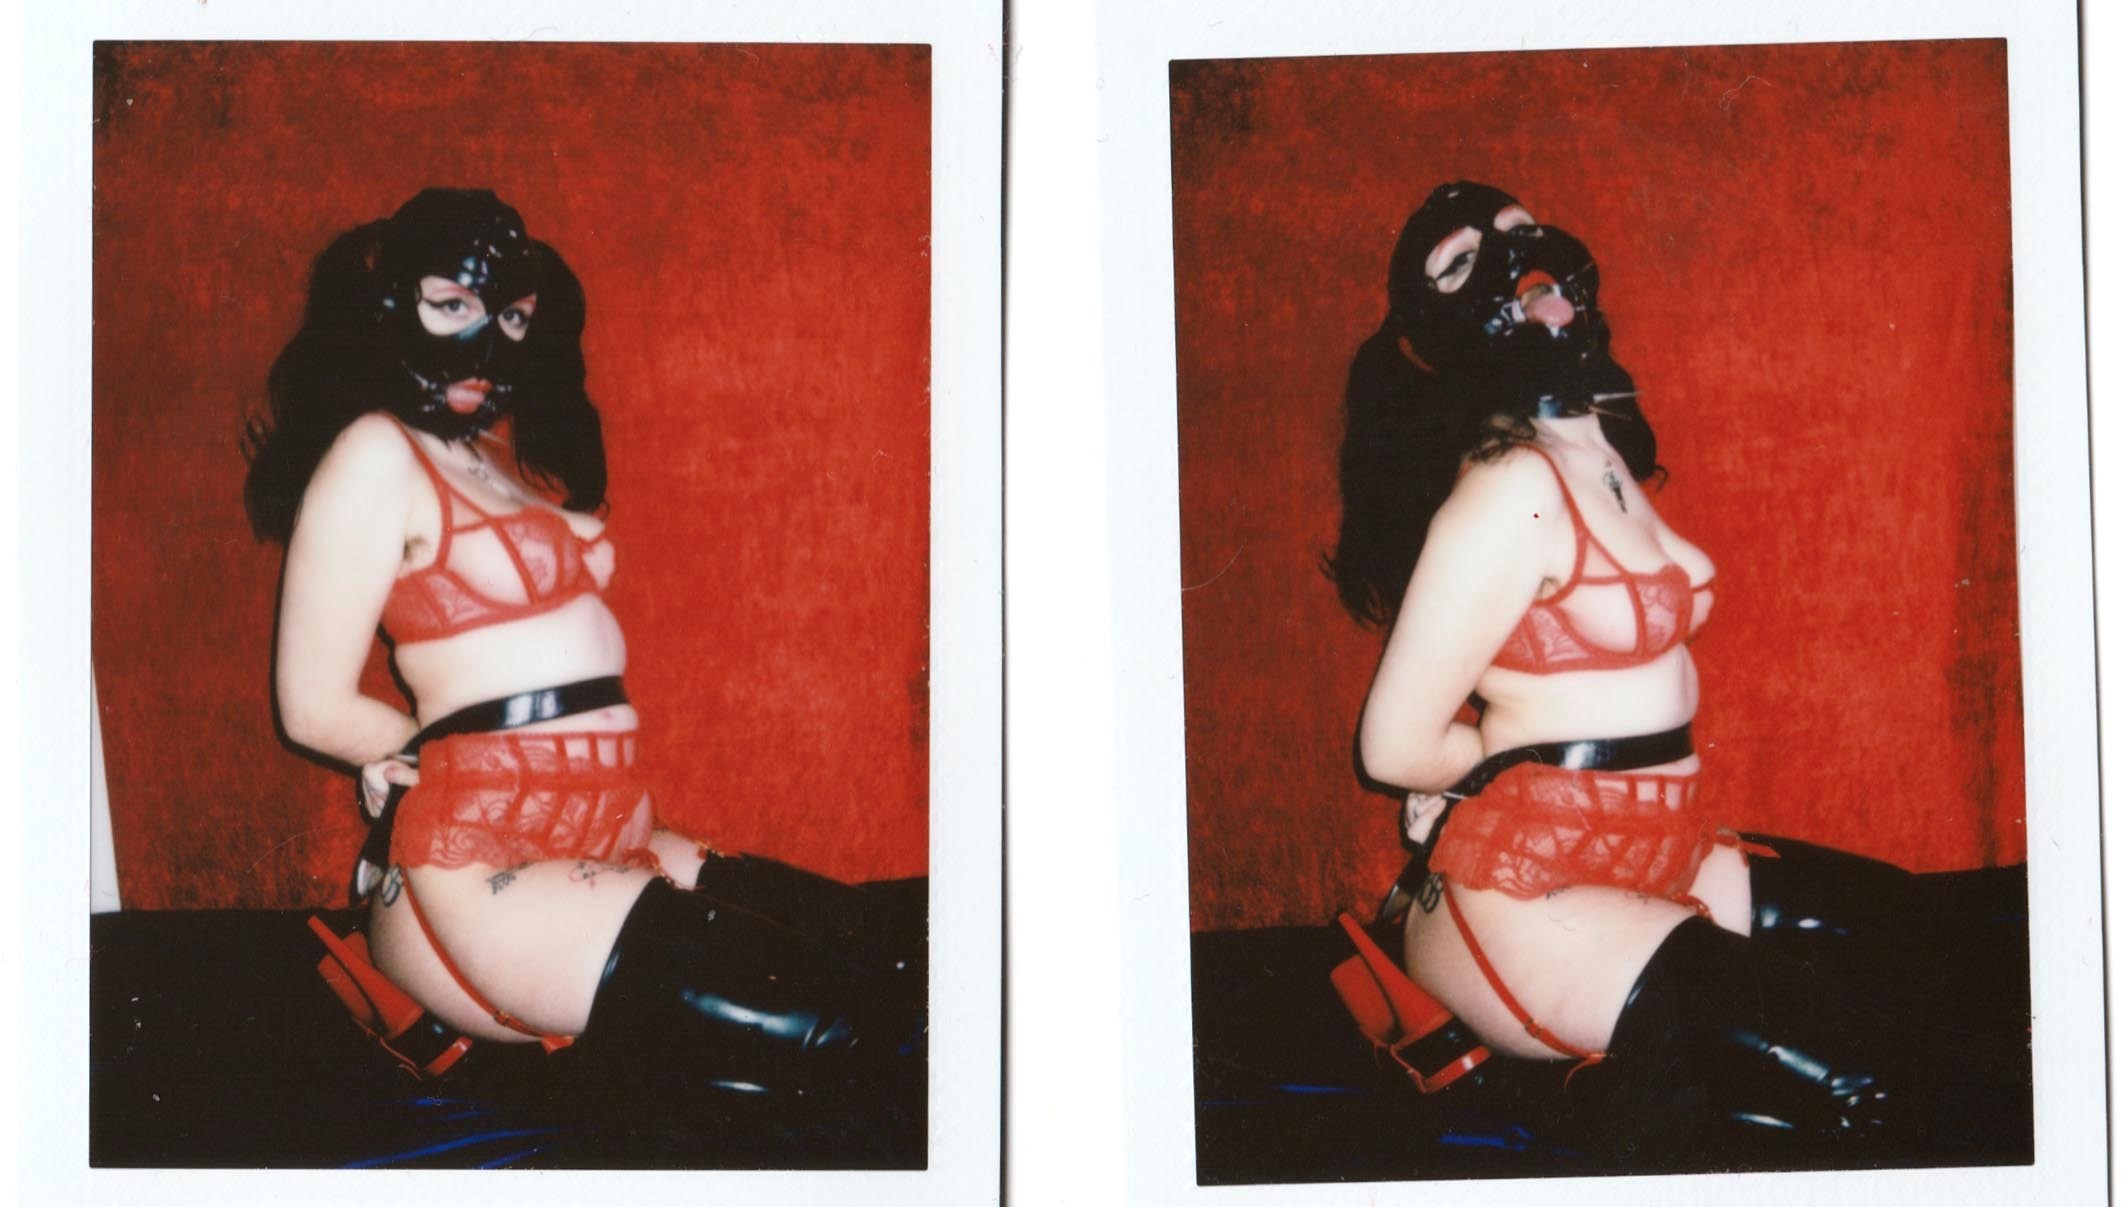 The photographers redefining the erotic image for the 21st century Dazed photo